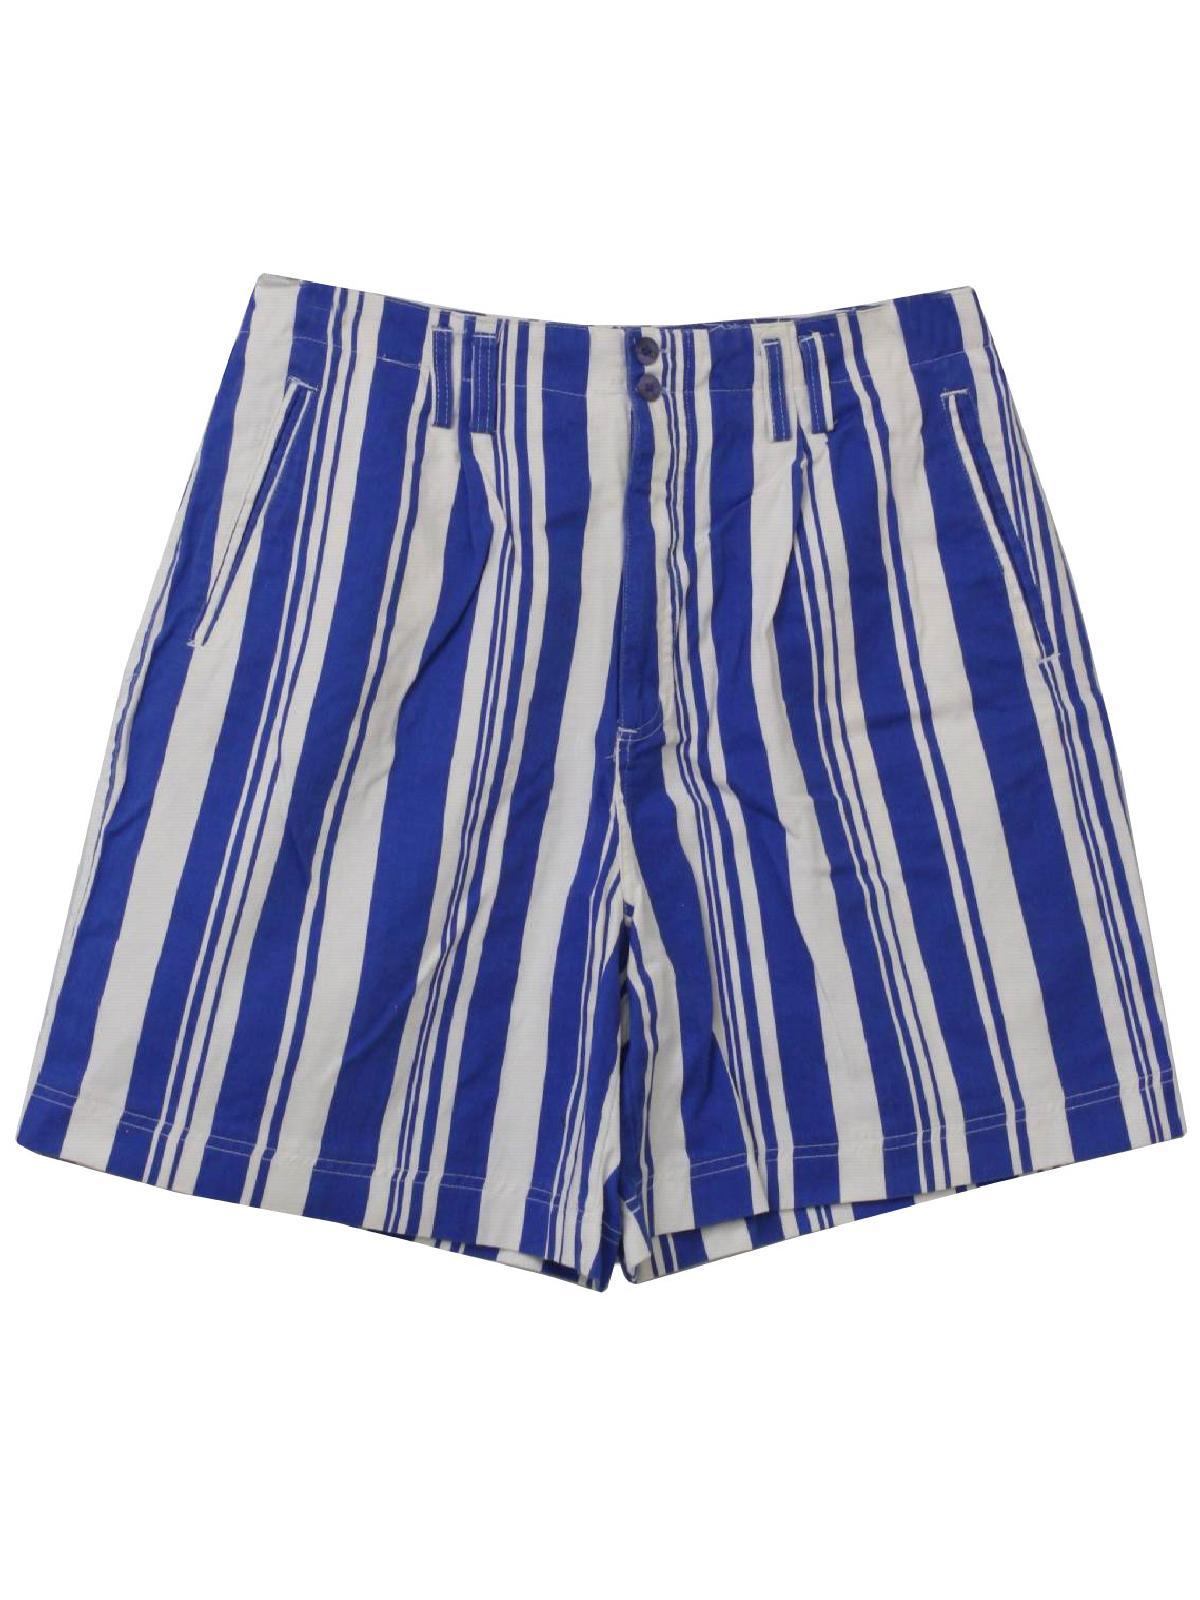 90s Retro Shorts: 90s -Basic Editions- Womens blue and white vertical ...